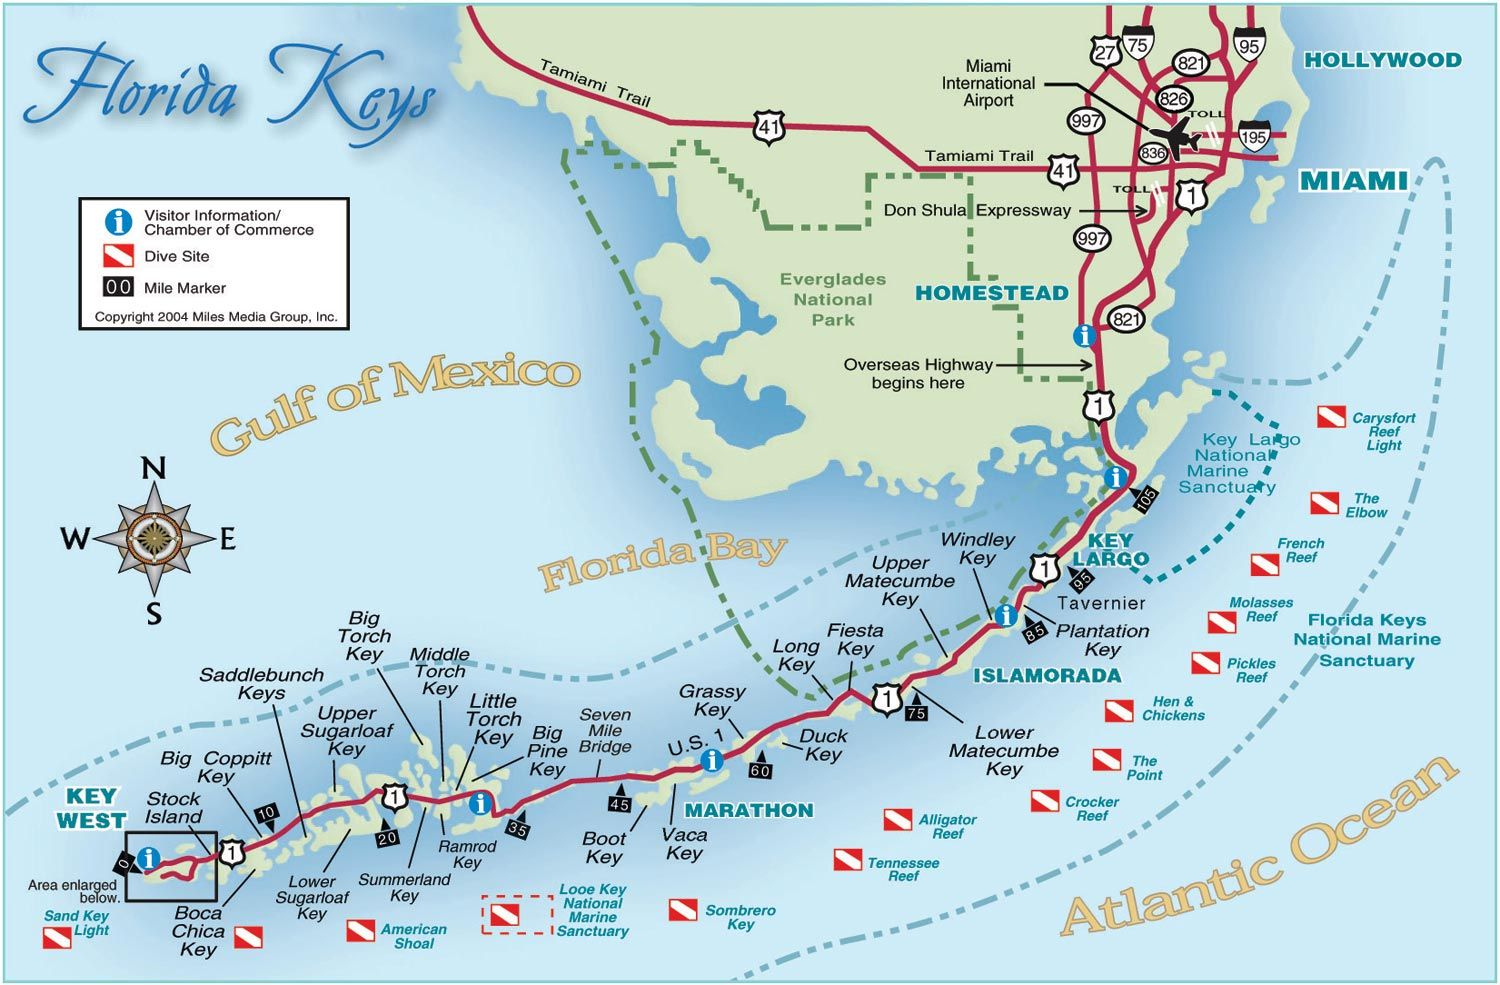 Image Detail For -Florida Keys And Key West Real Estate And Tourist - Key West Florida Map Of Hotels